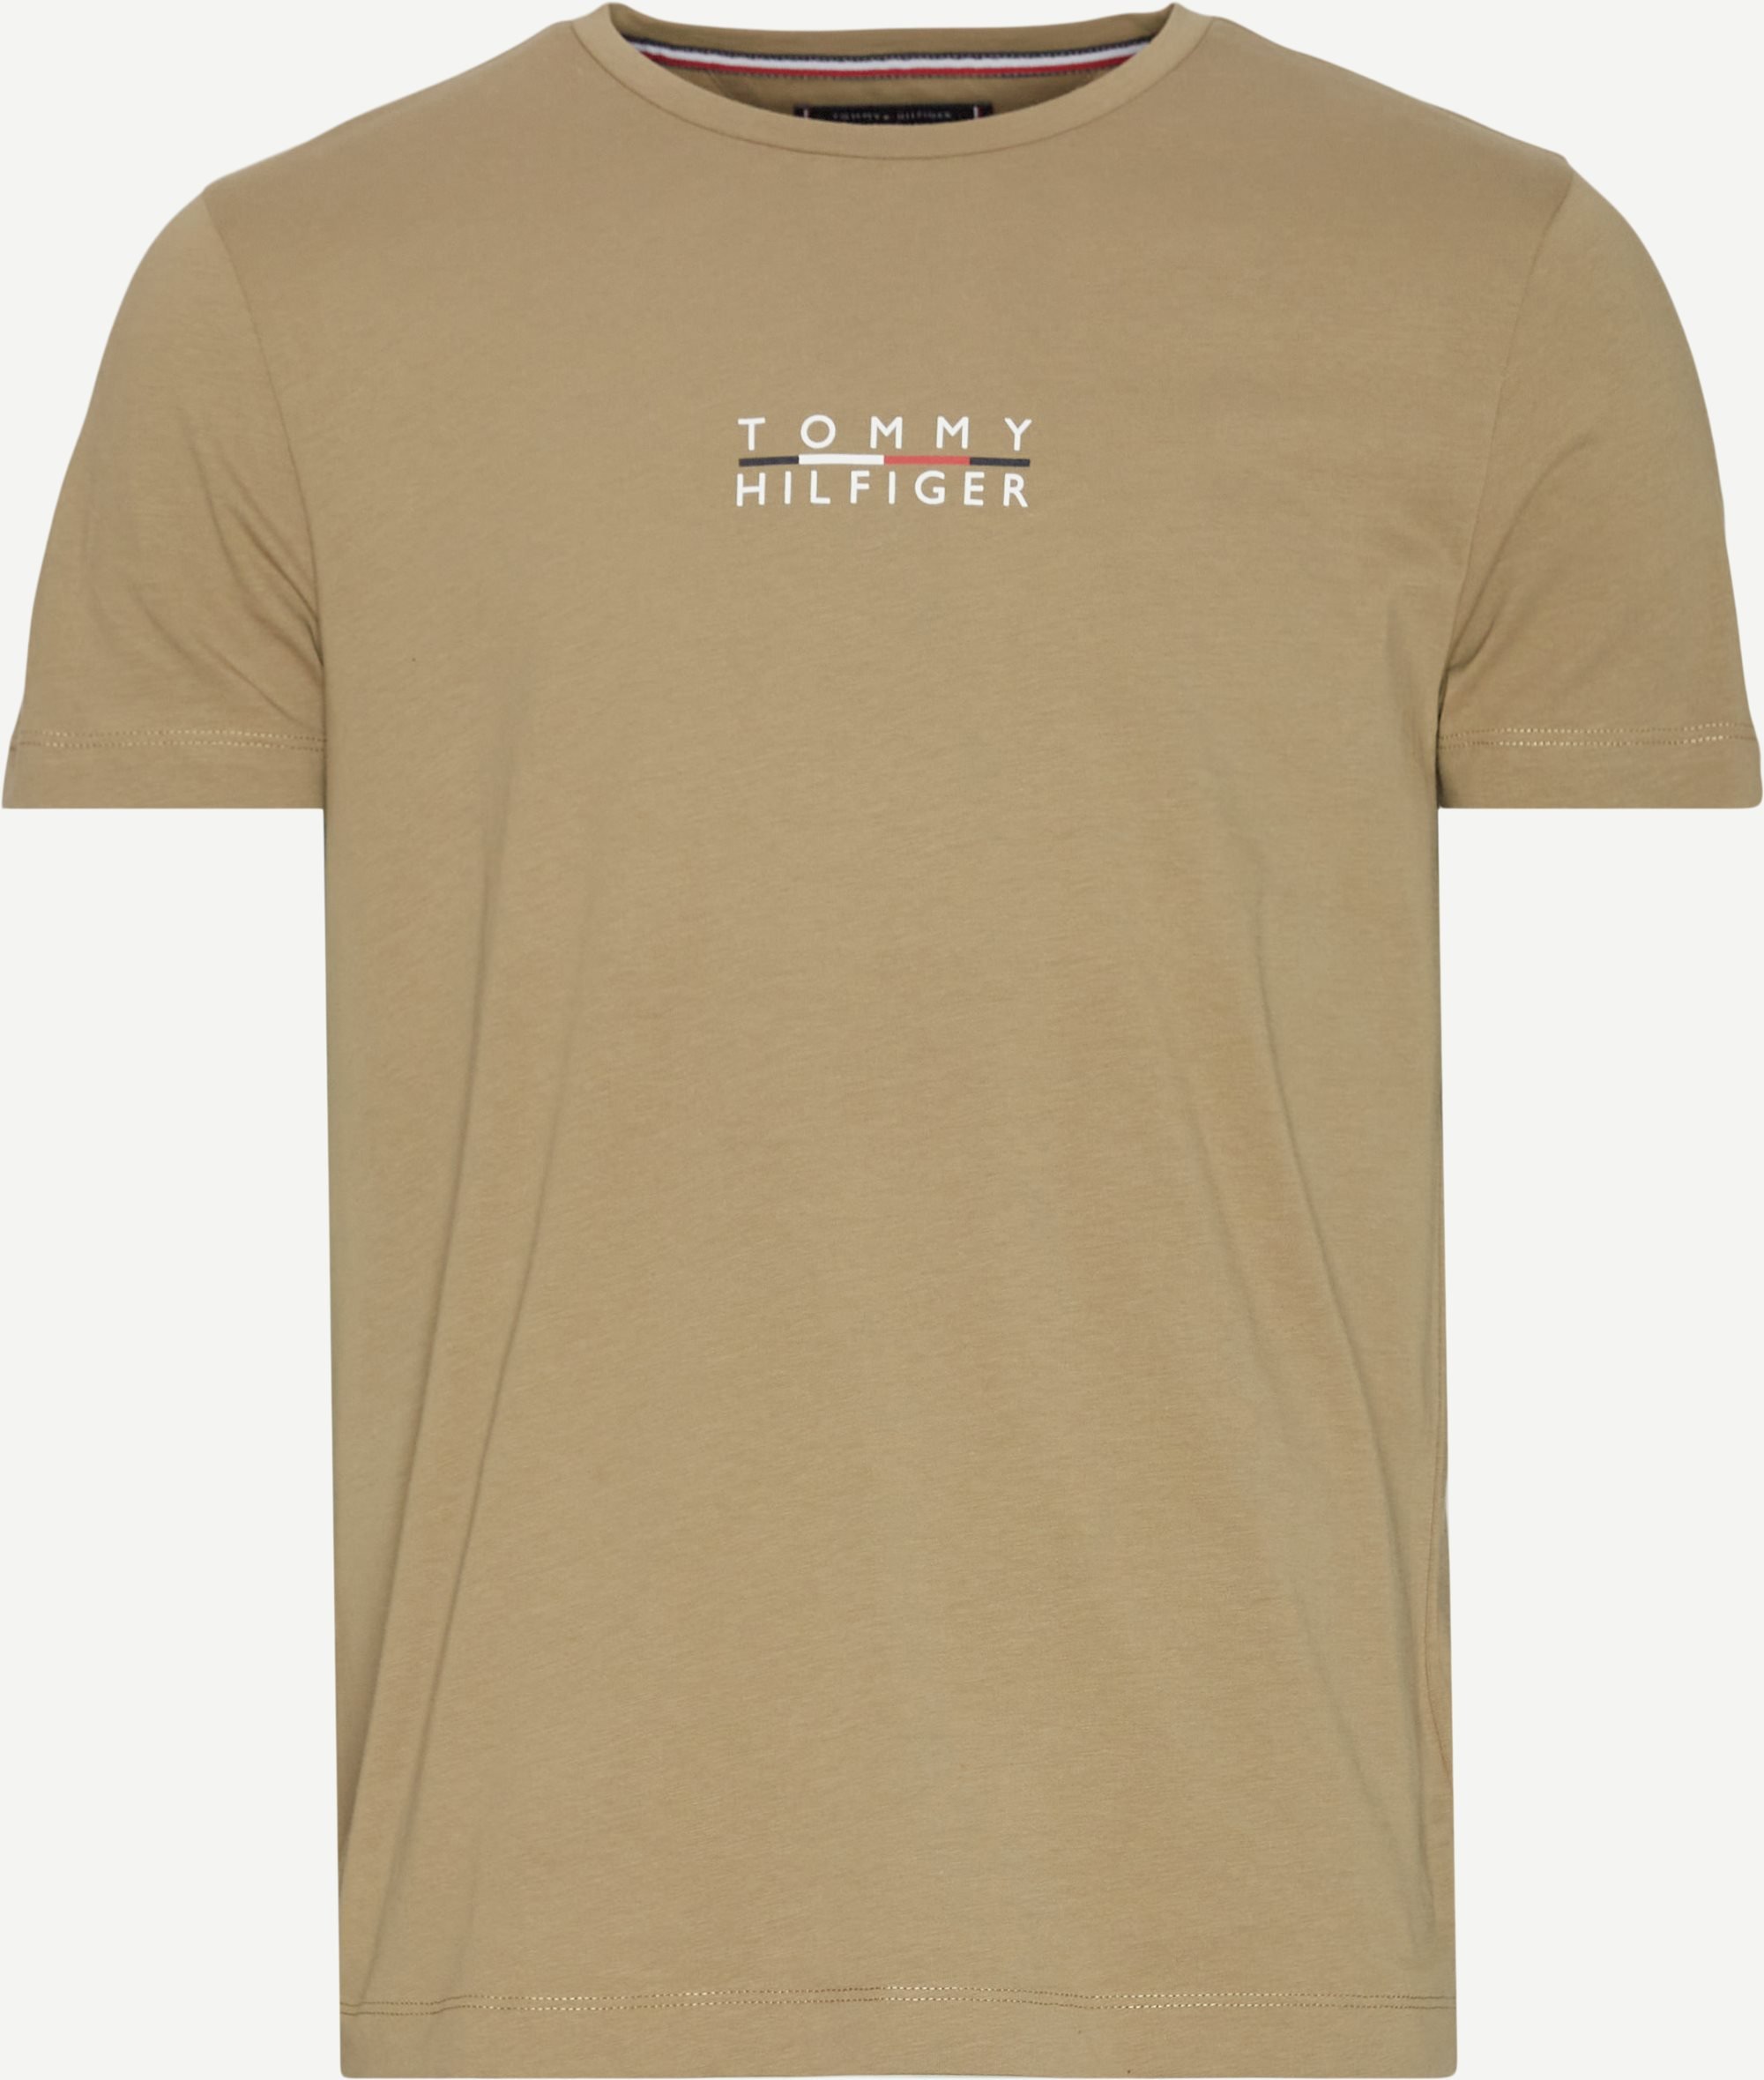 Square Logo Tee - T-shirts - Regular fit - Army